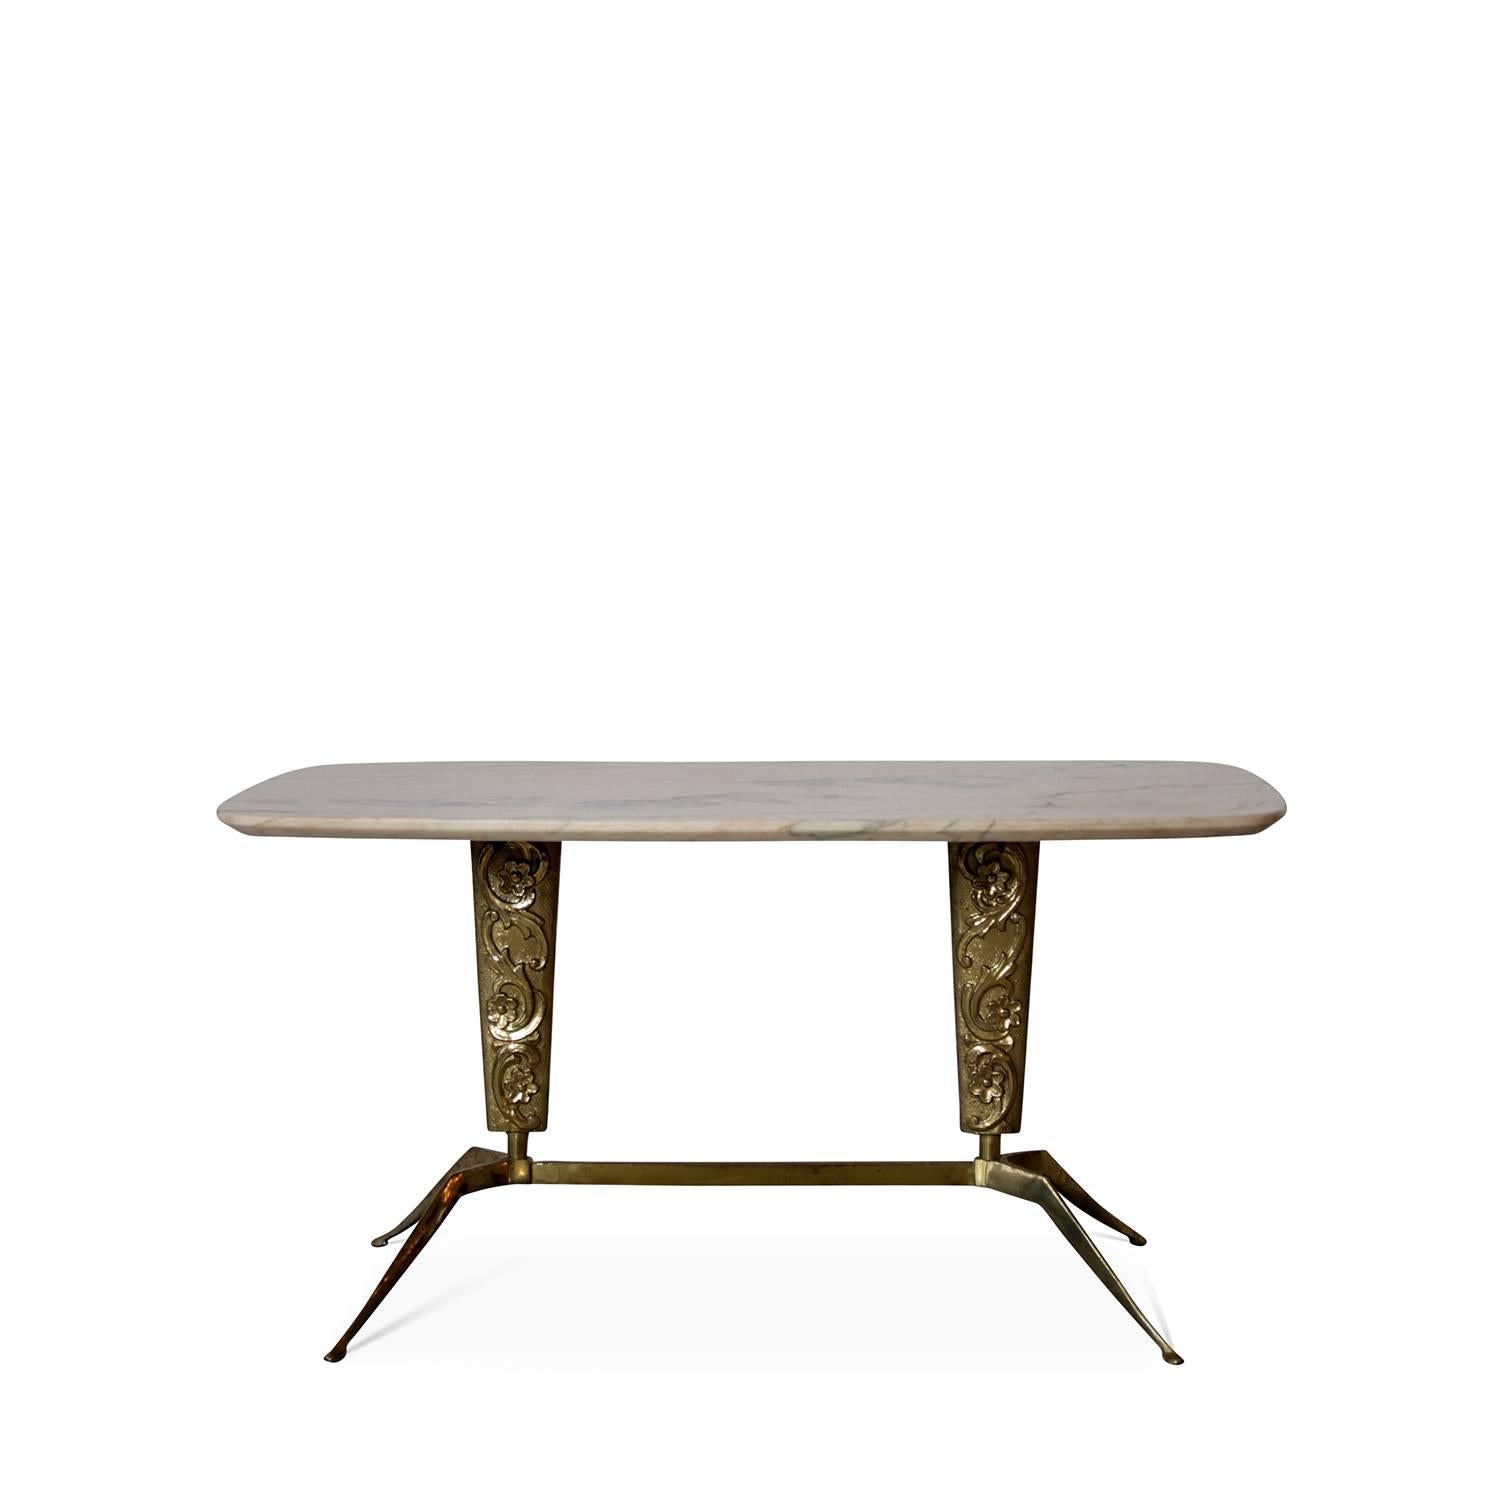 Mid-20th Century Italian Mid Century Sofa Table with veined Marble Top, 1950 For Sale